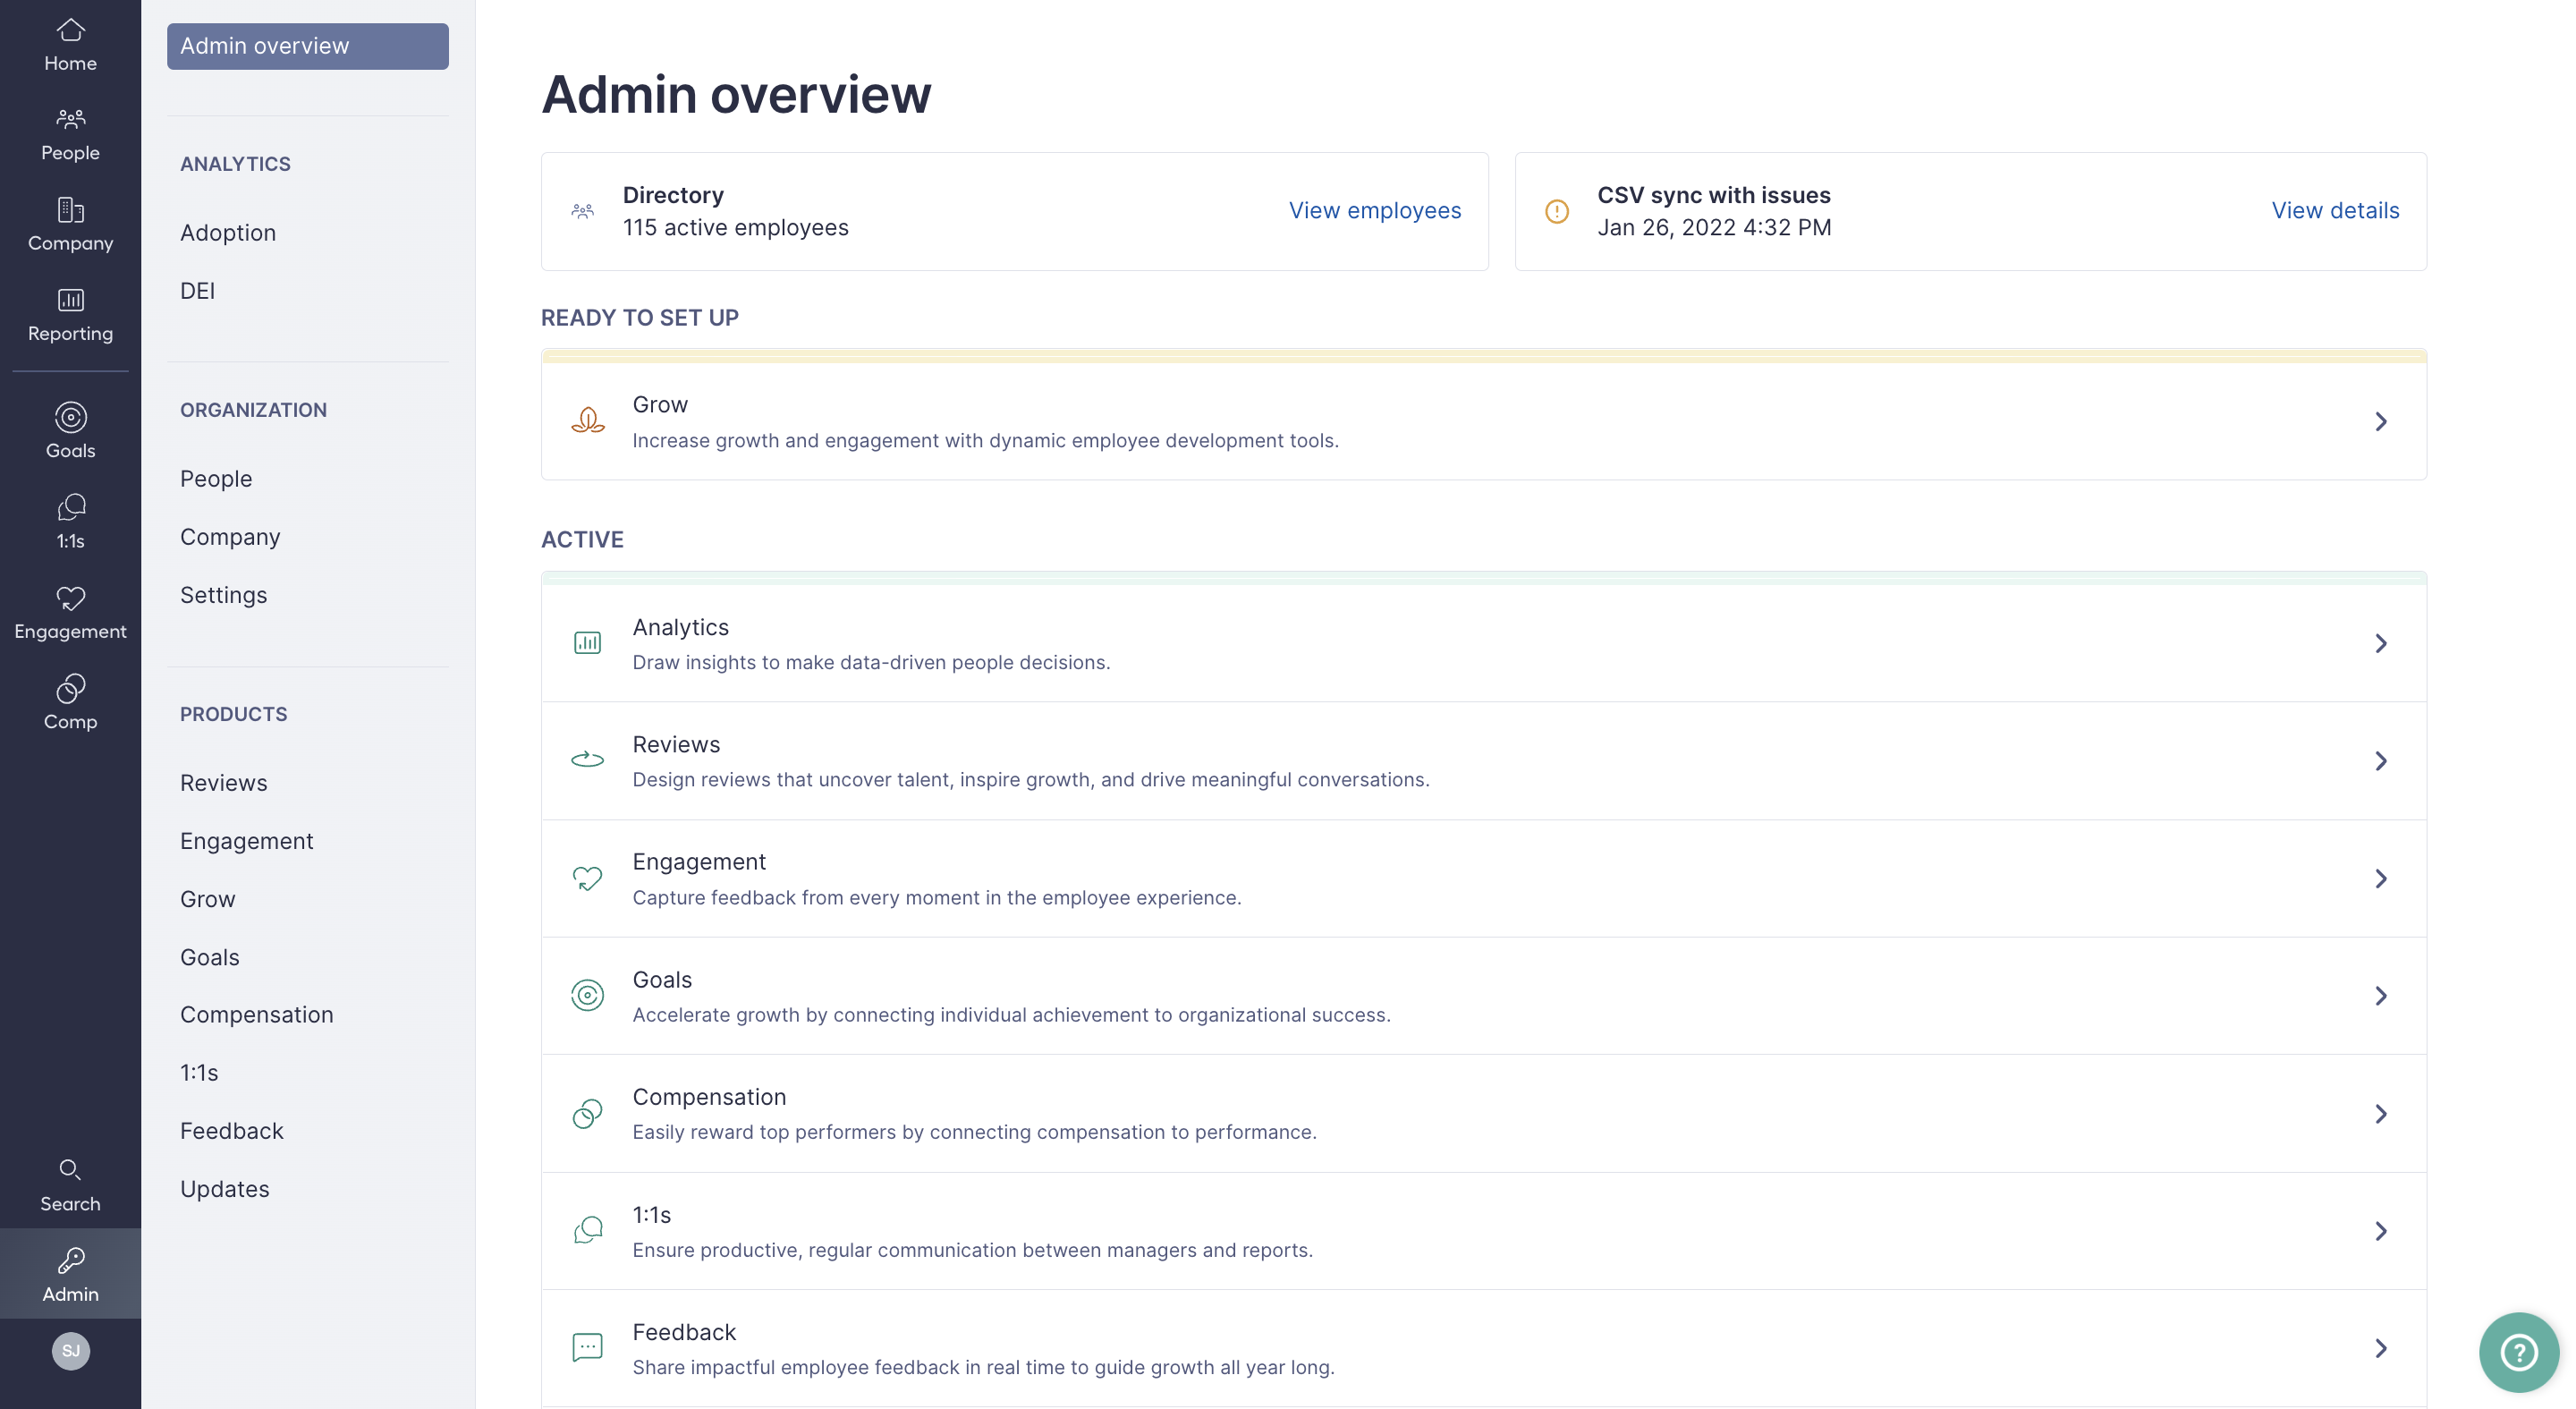 Image of the Lattice Admin Overview page